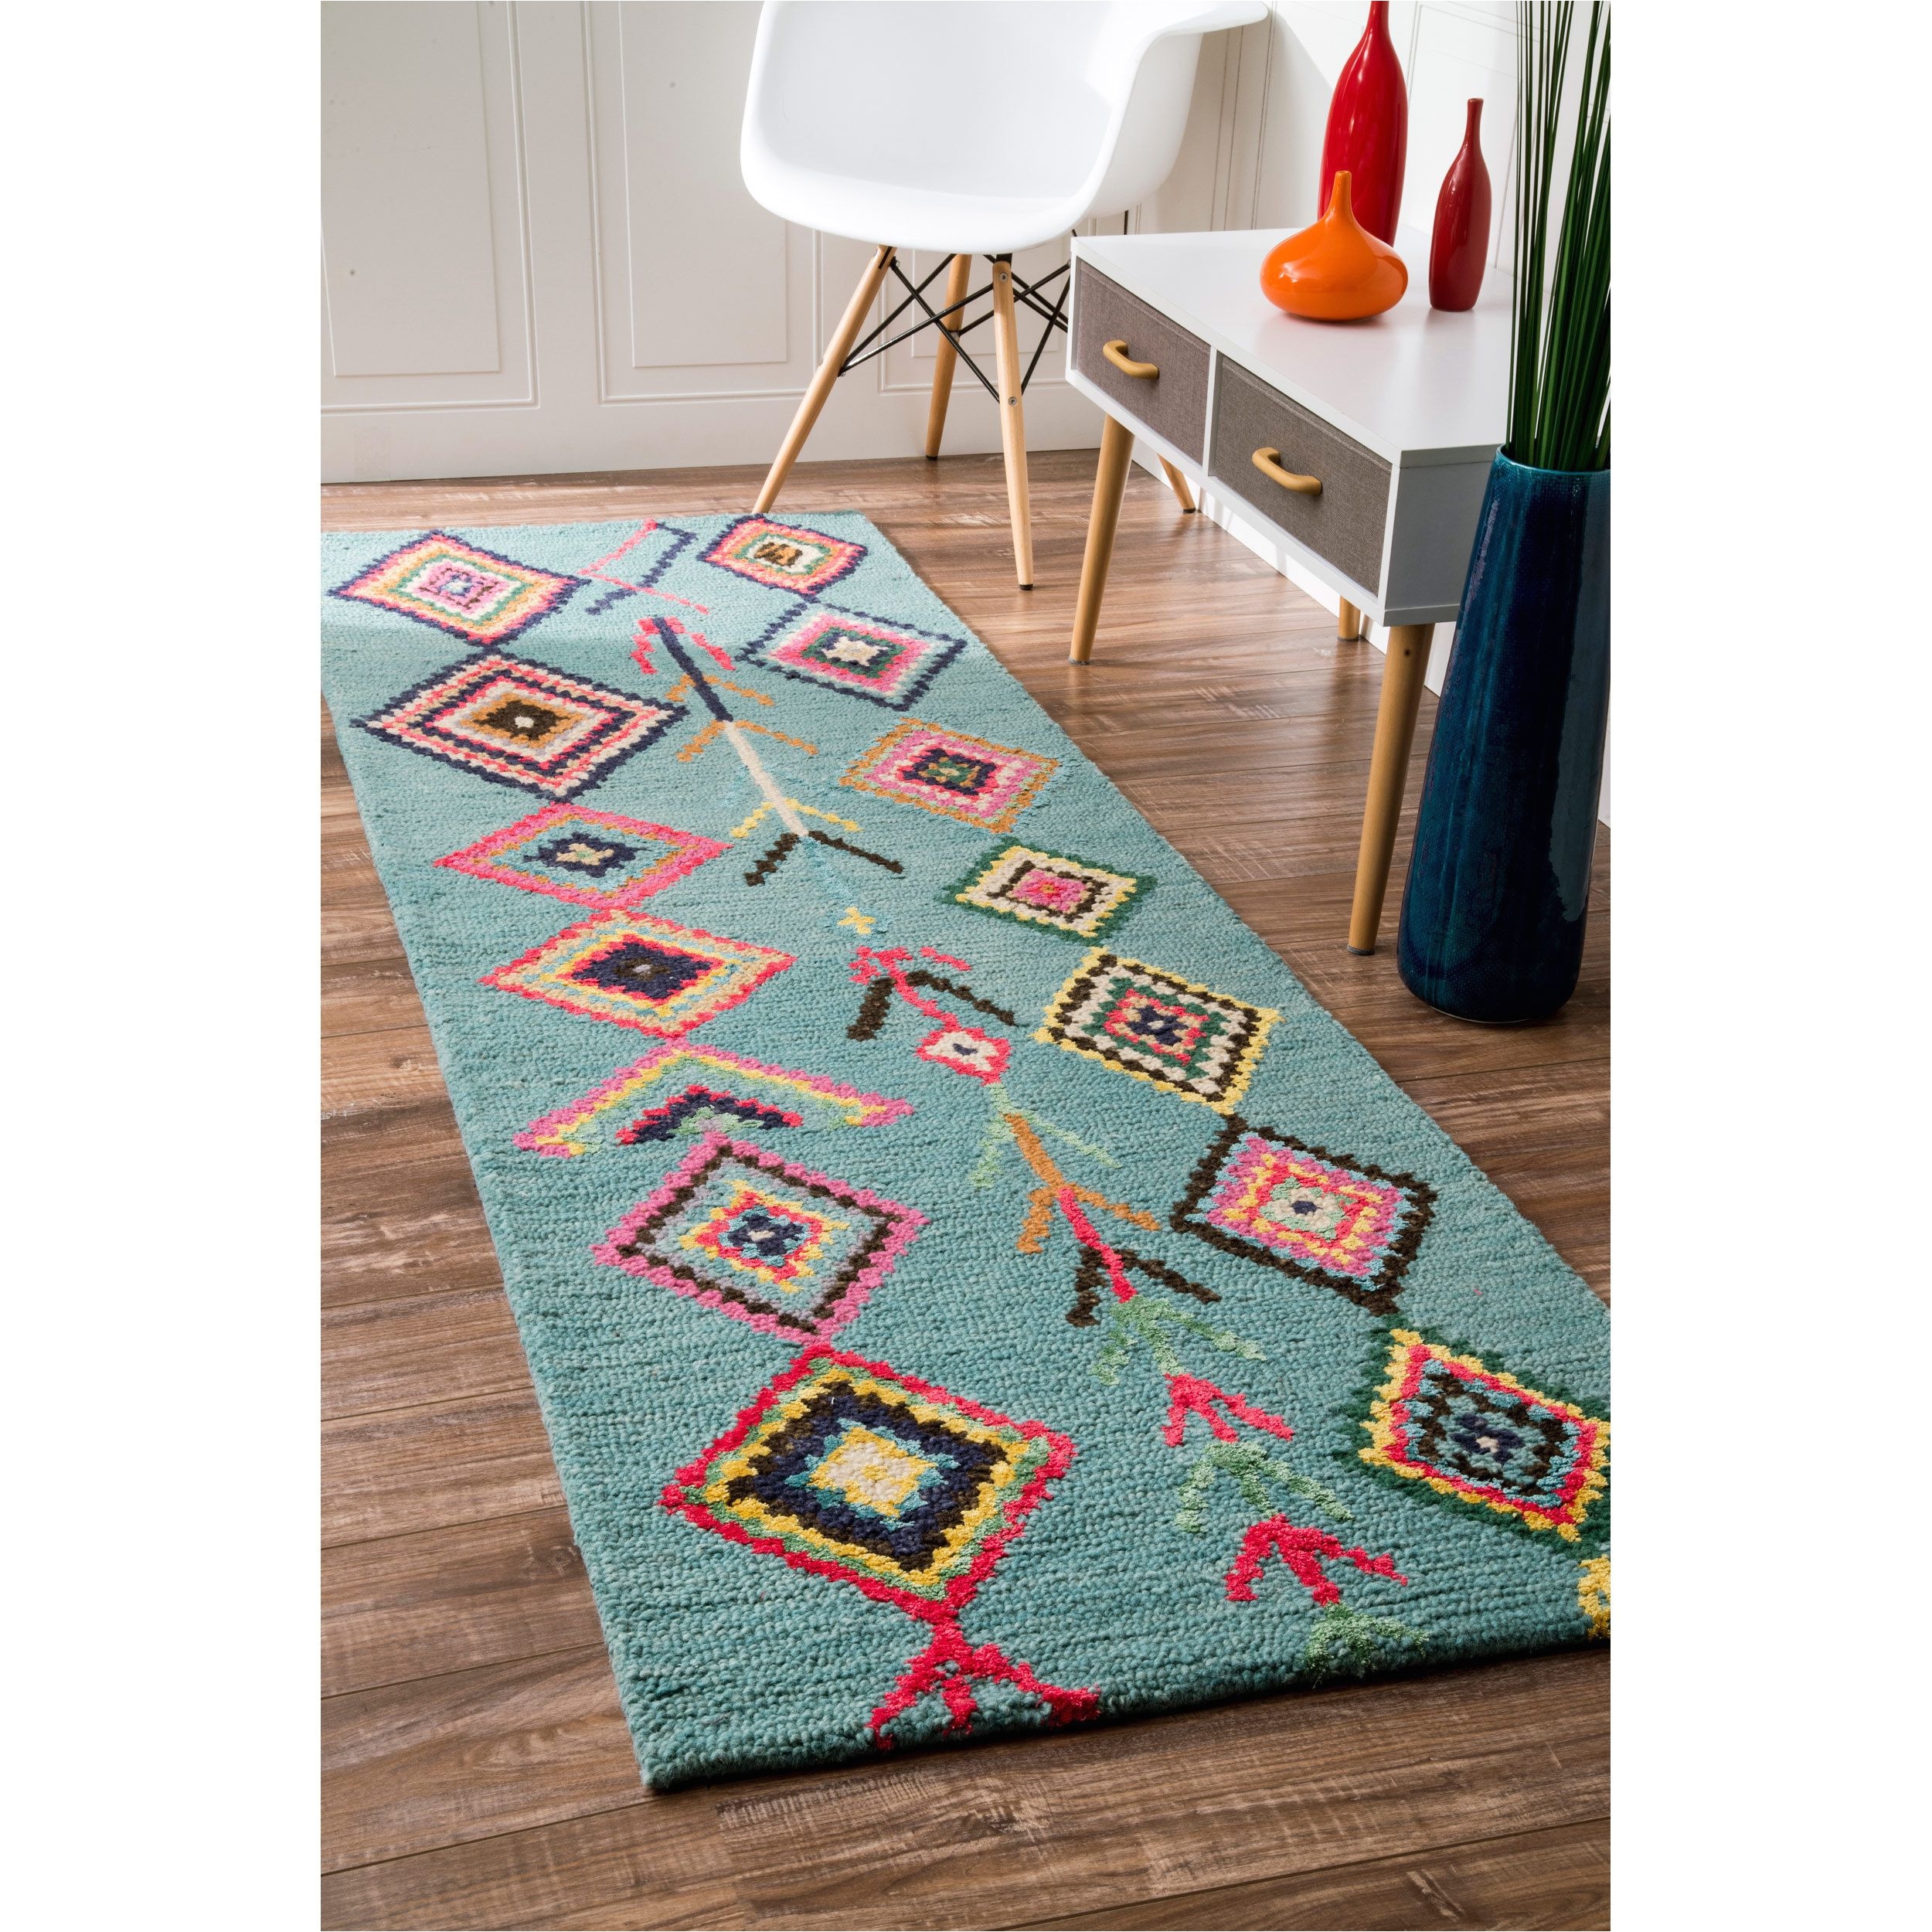 nuloom contemporary handmade wool viscose moroccan triangle turquoise runner rug 2 6 x 10 turquoise brown size 2 6 x 10 synthetic abstract